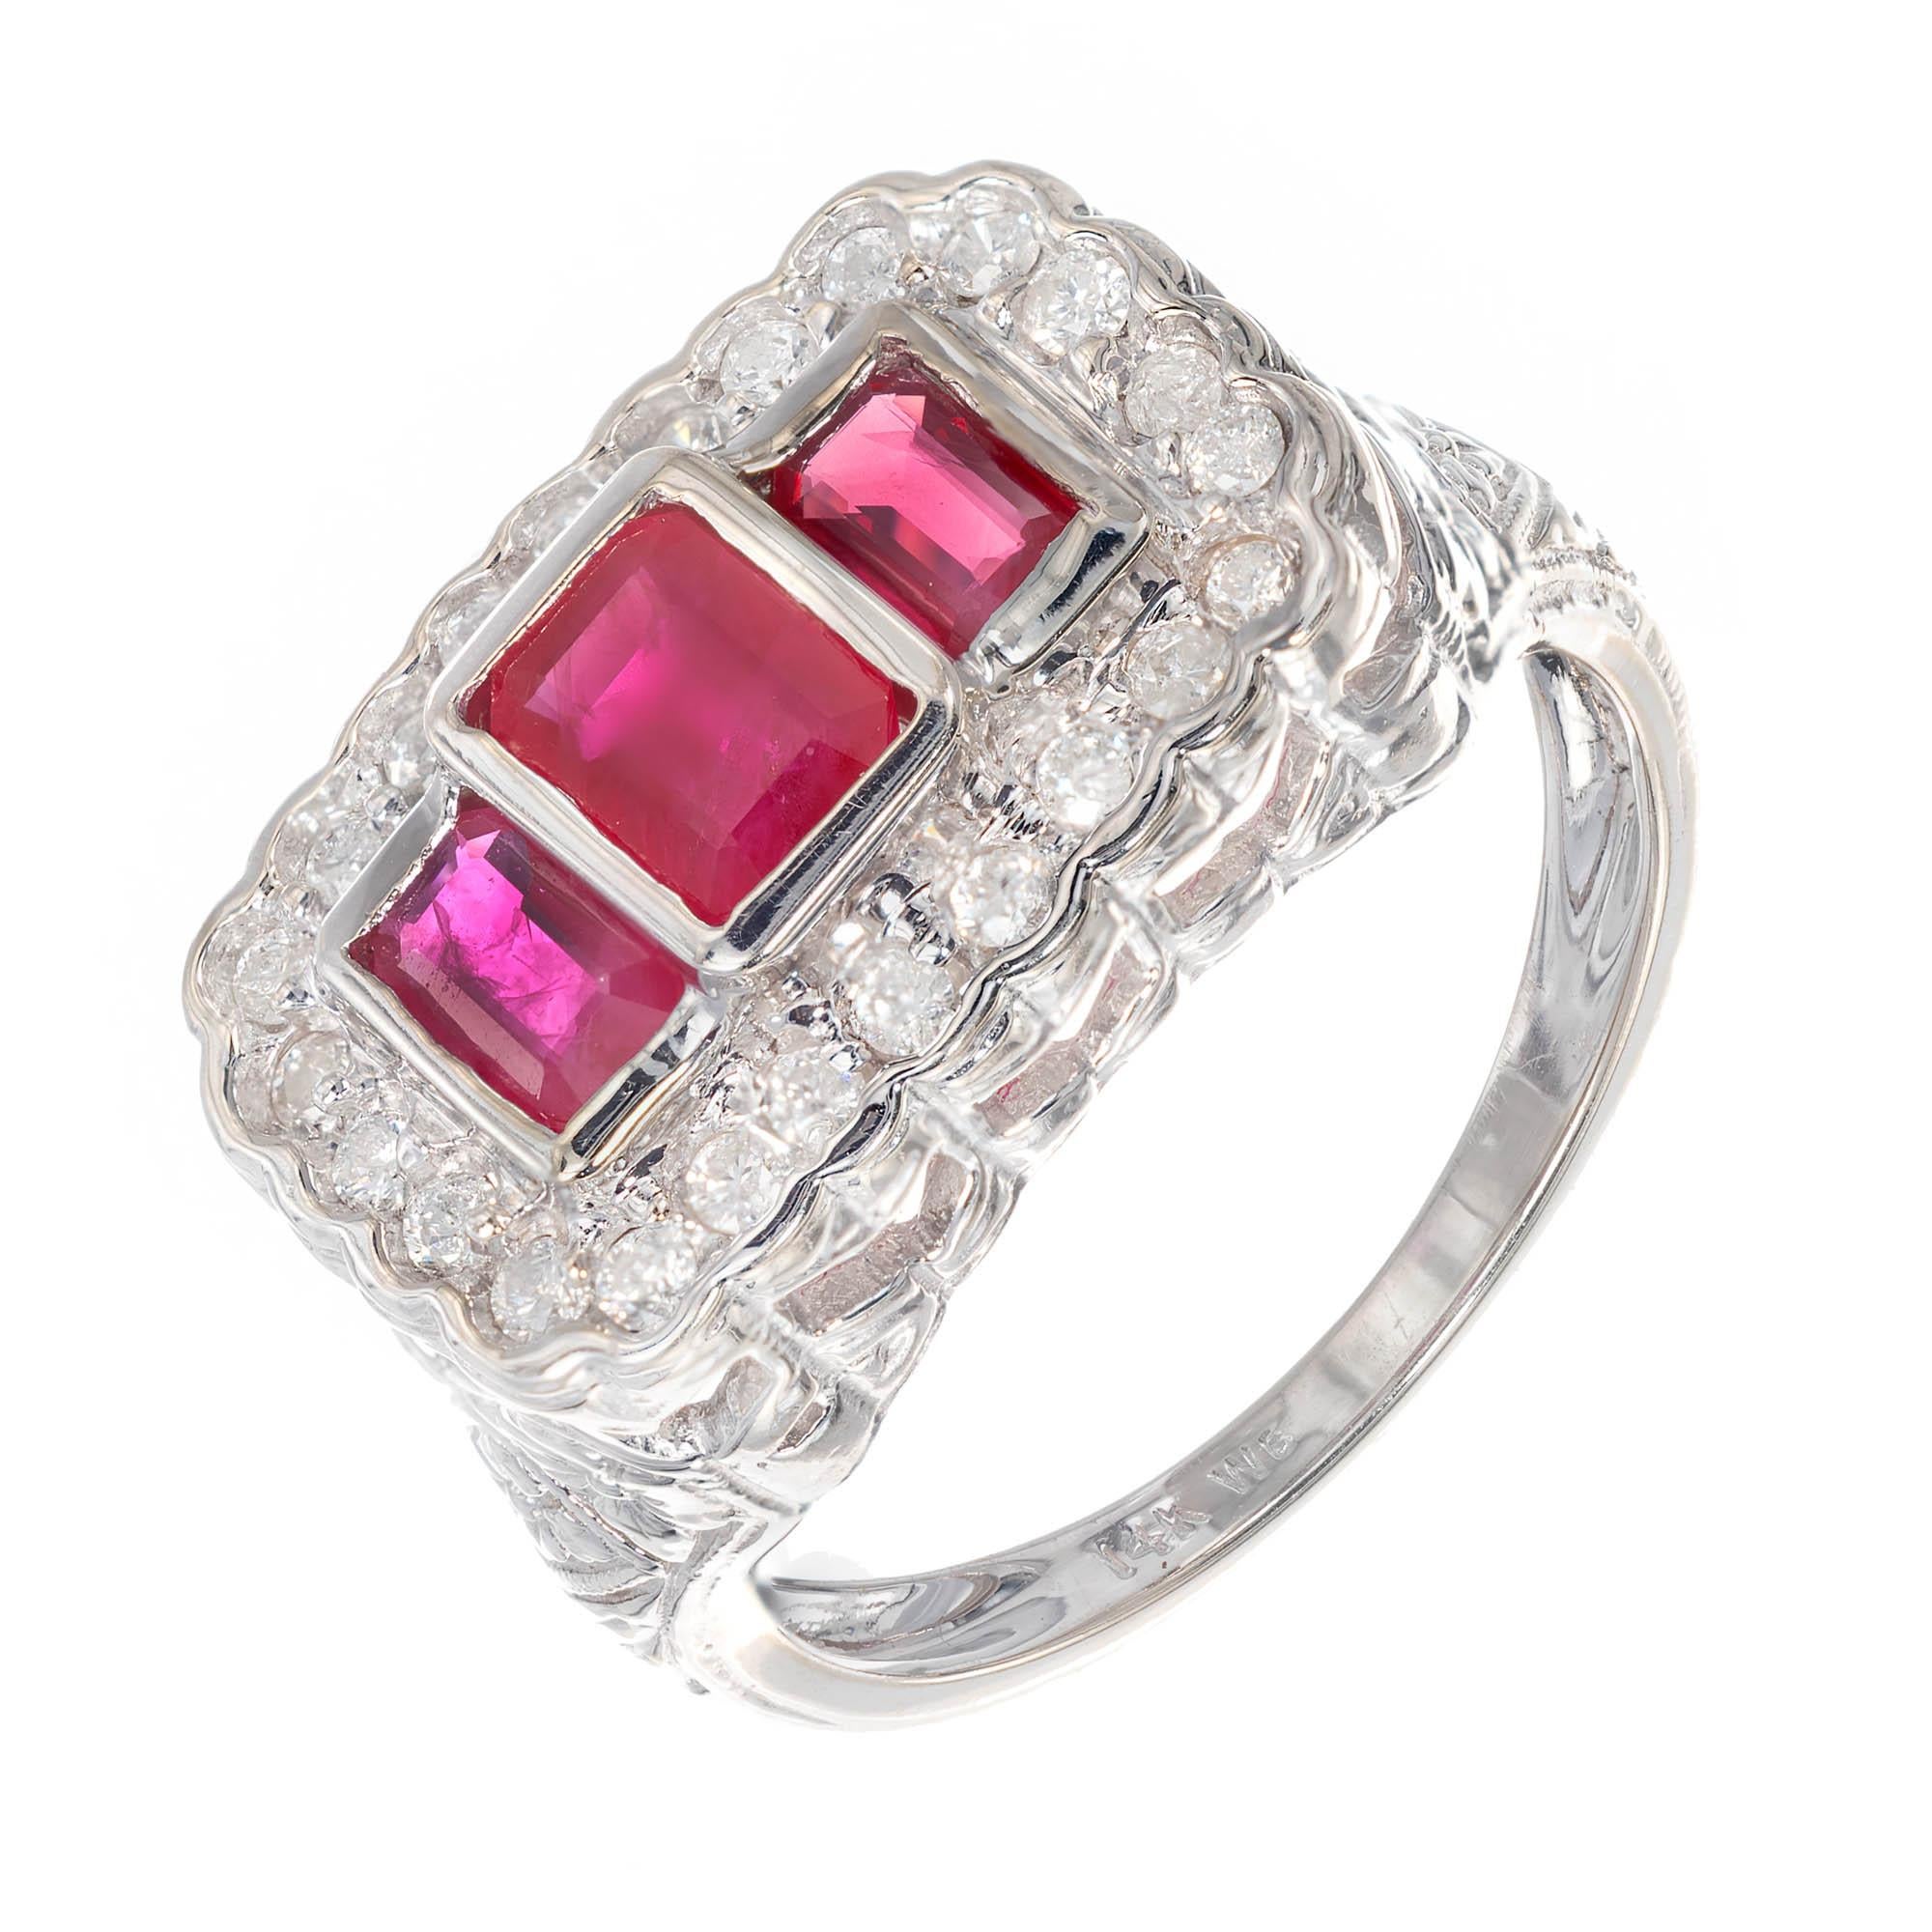 14k White gold vintage ruby and diamond cocktail ring. Larger octagonal step cut ruby bezel set in the center of two smaller octagonal rubies bezel set with a rectangular halo of round diamonds around the shank of ring with cut out heart filigree